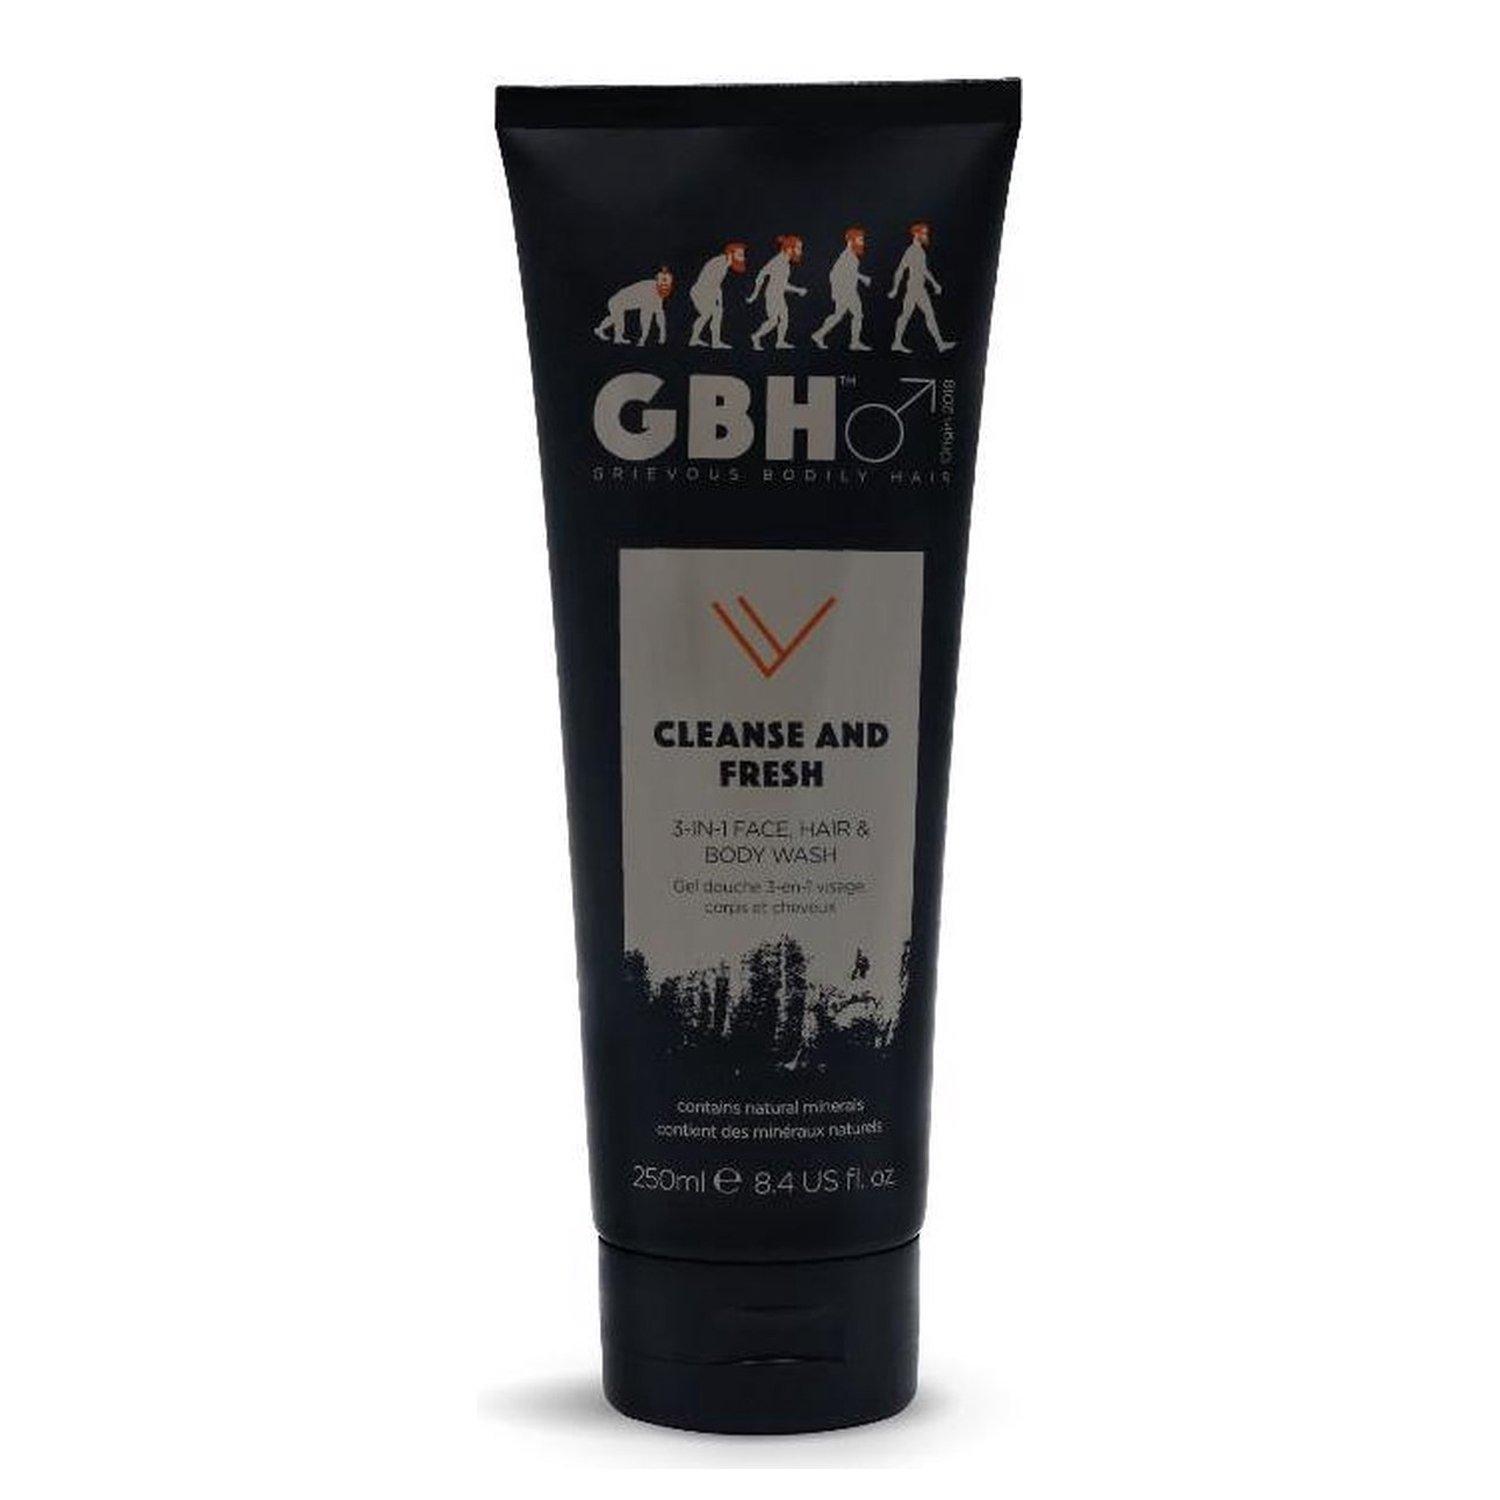 GBH Cleanse & Fresh 3-in-1 Face Hair Body Wash 250ml